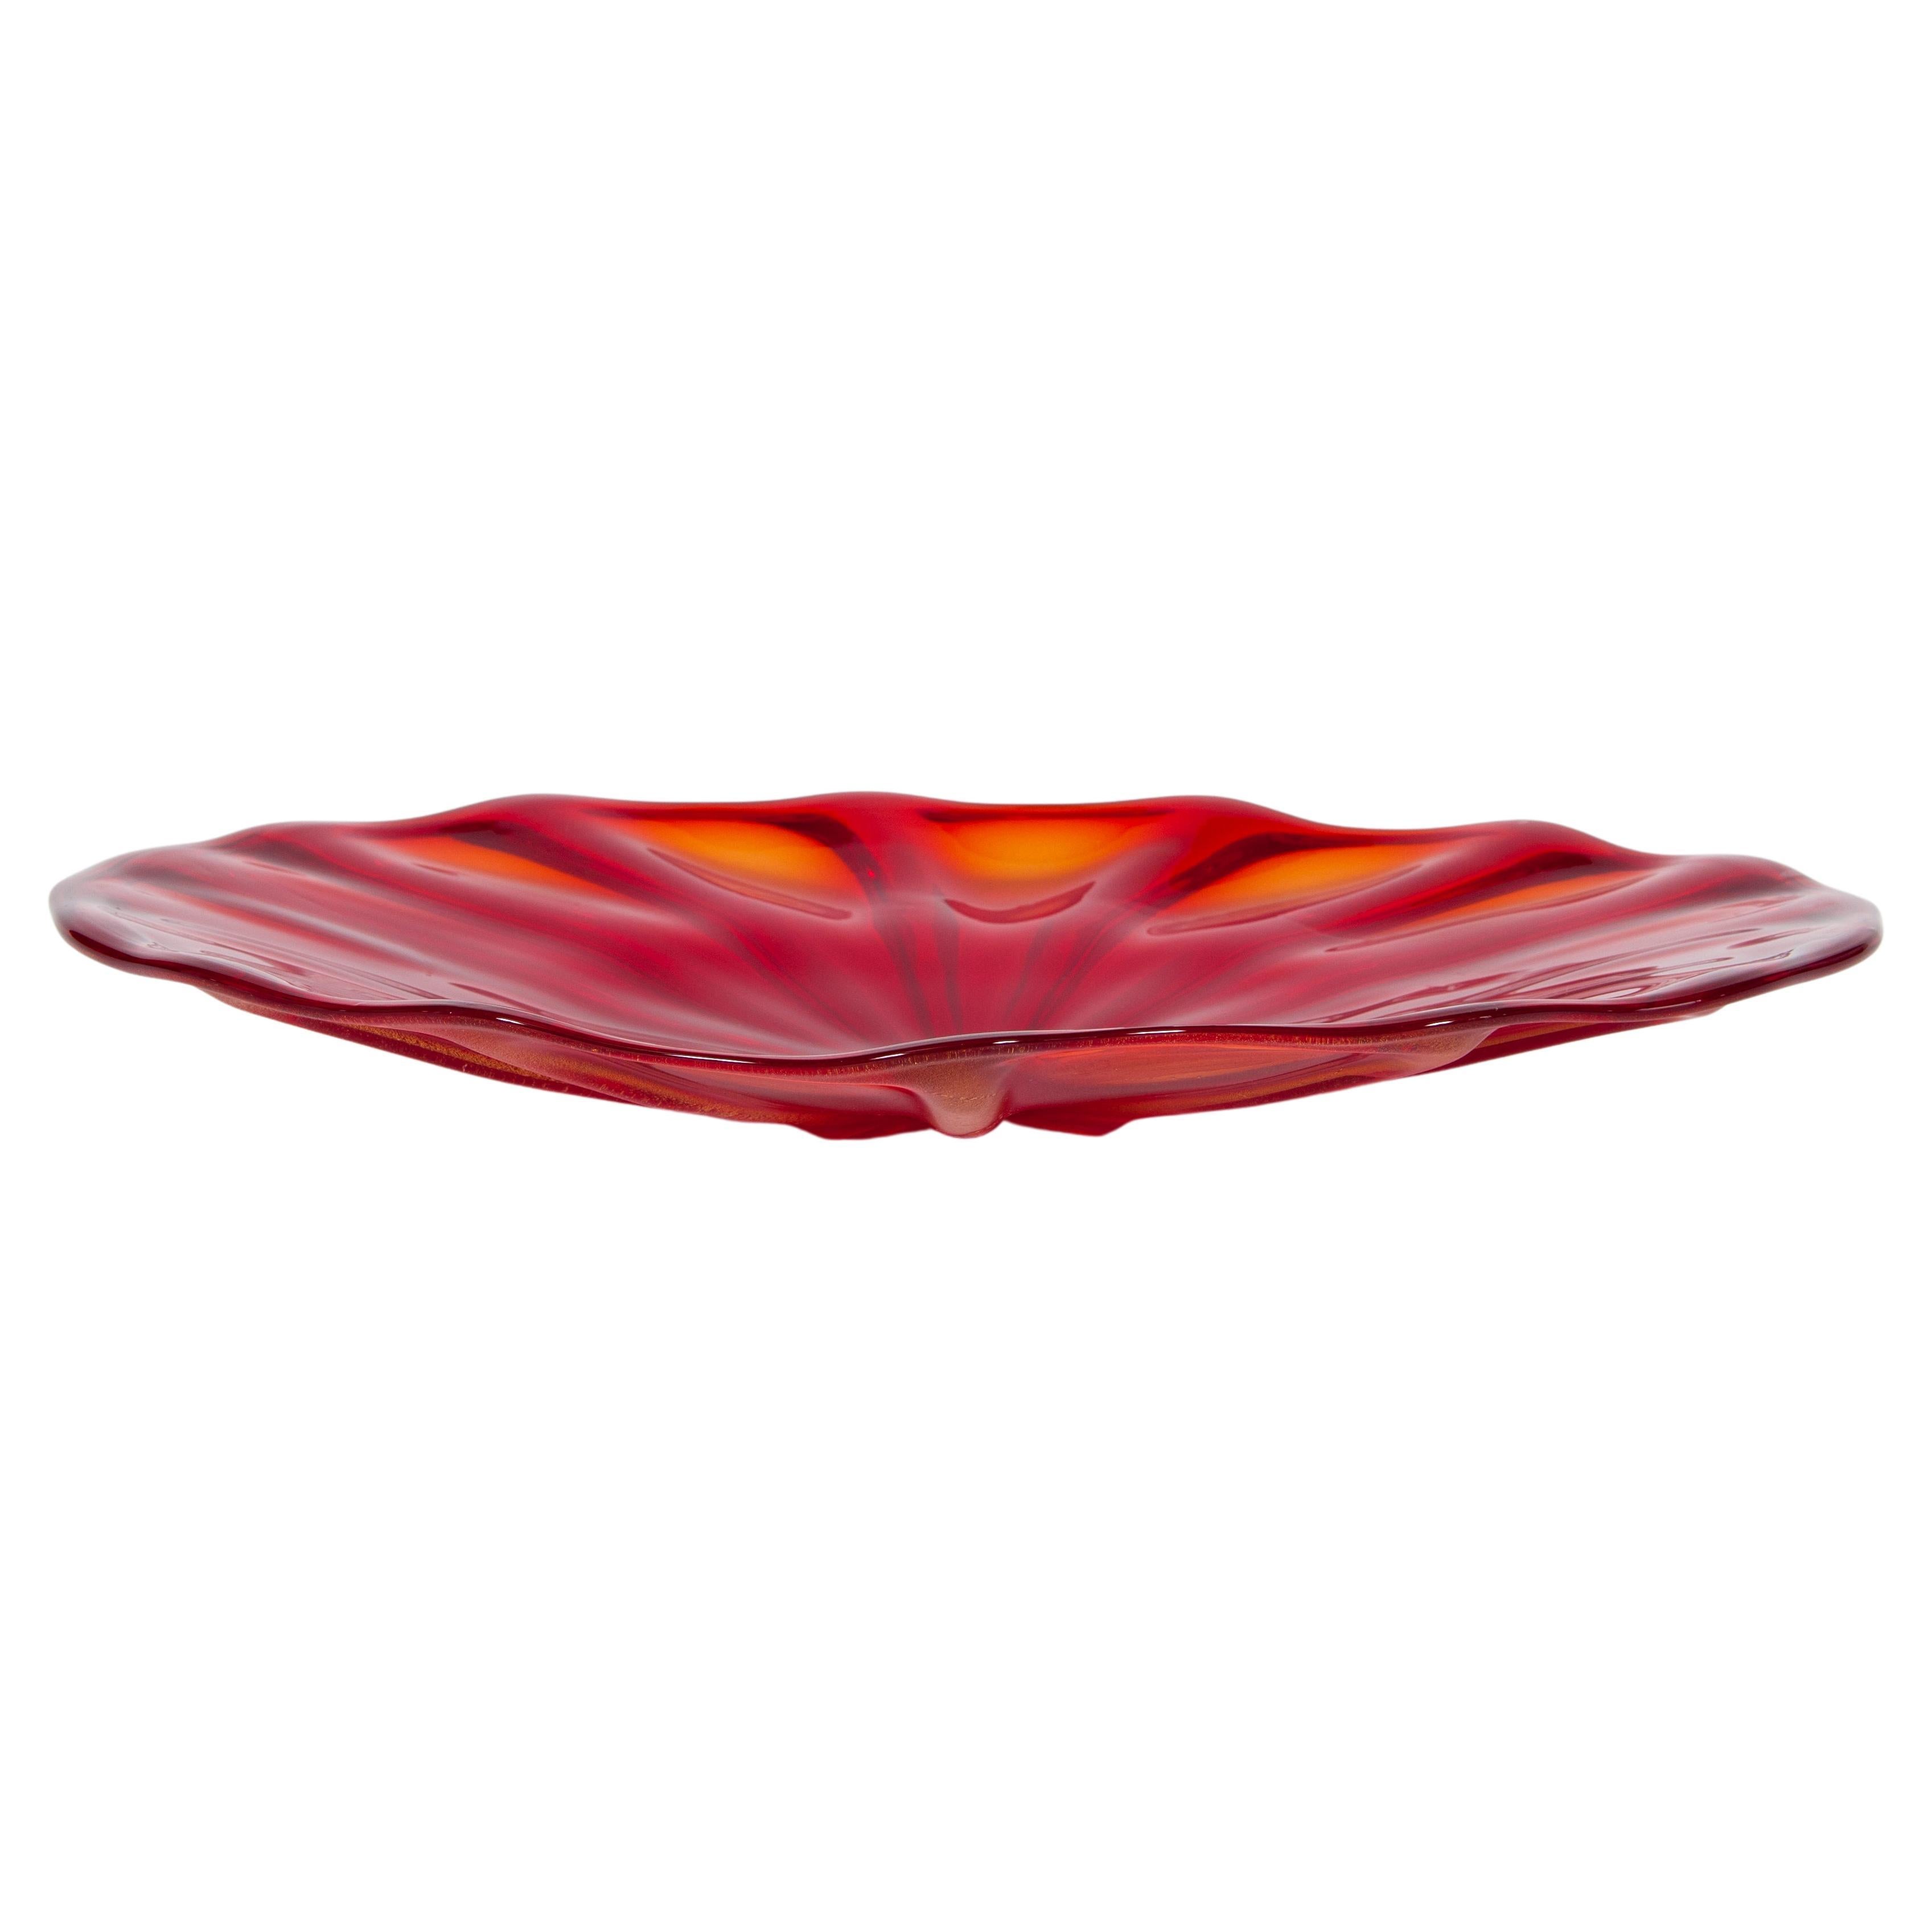 Italian Venetian Red Murano Glass Centerpiece with Submerged Gold, 2000s For Sale